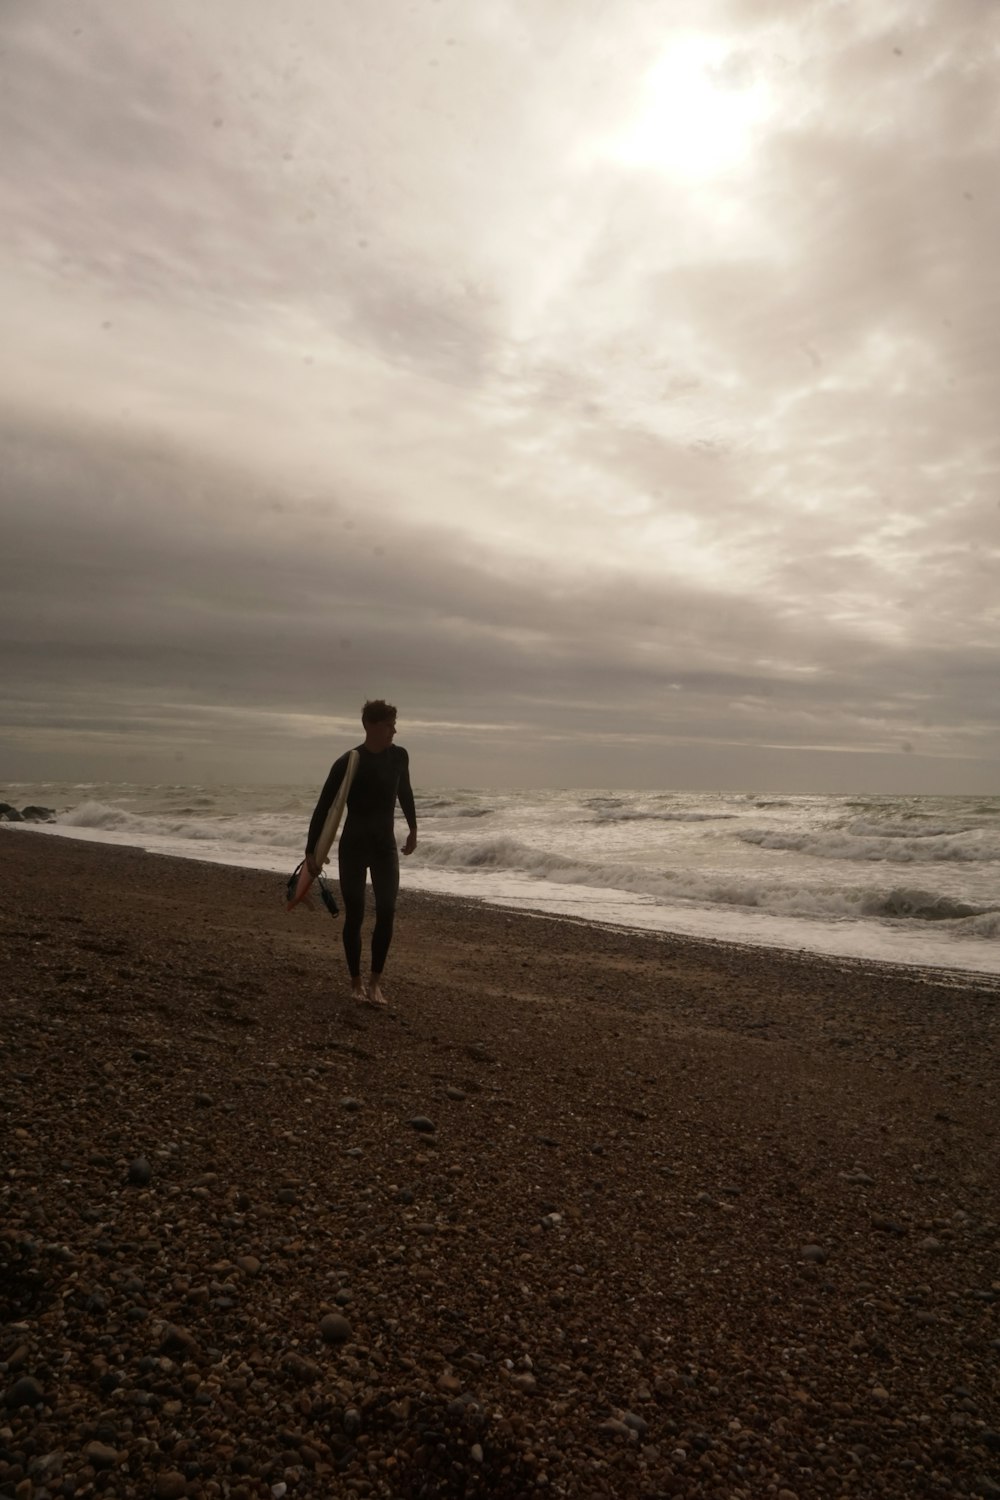 a man walking on a beach with a surfboard